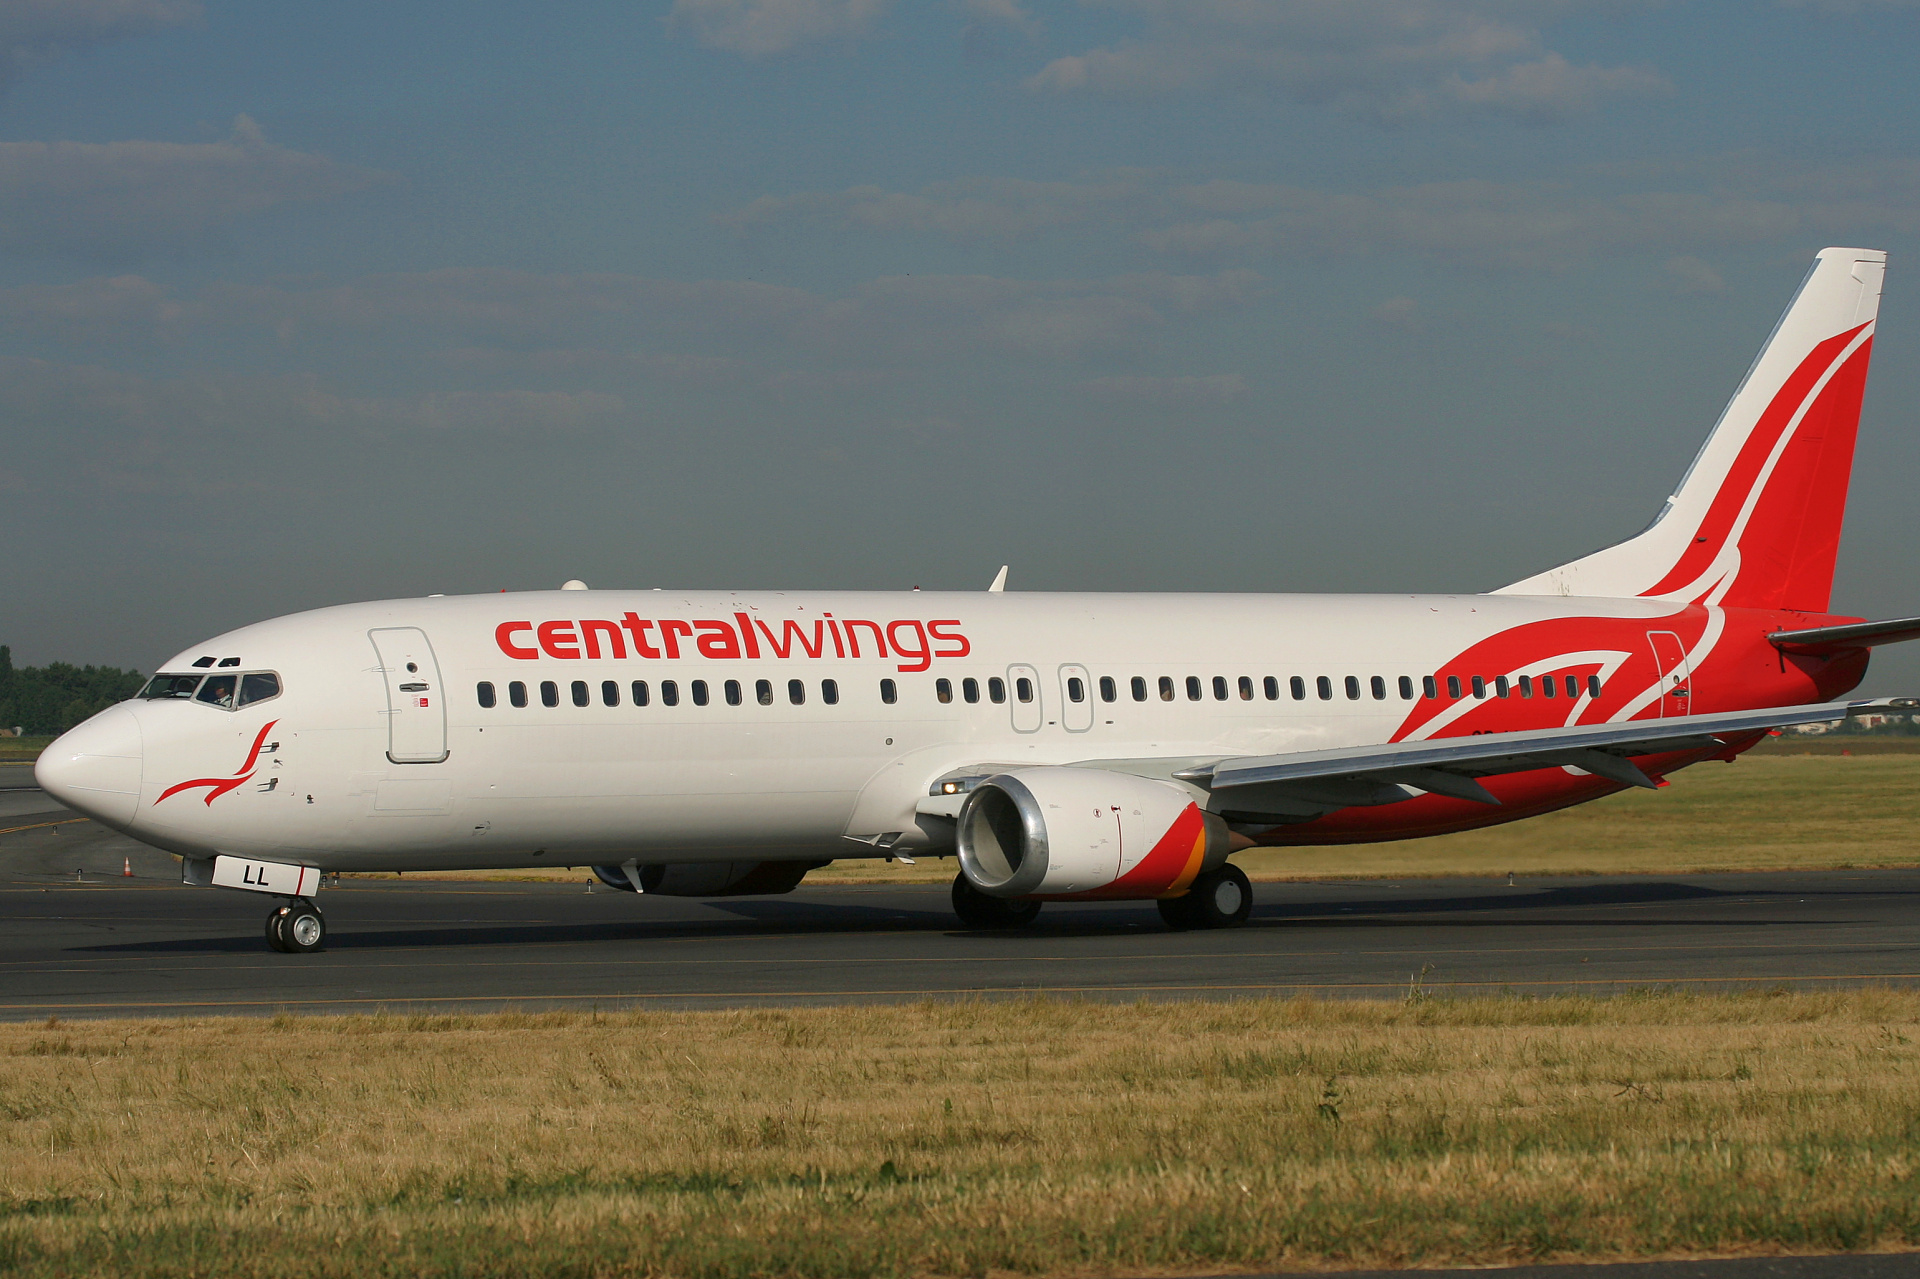 SP-LLL (Aircraft » EPWA Spotting » Boeing 737-400 » Centralwings)